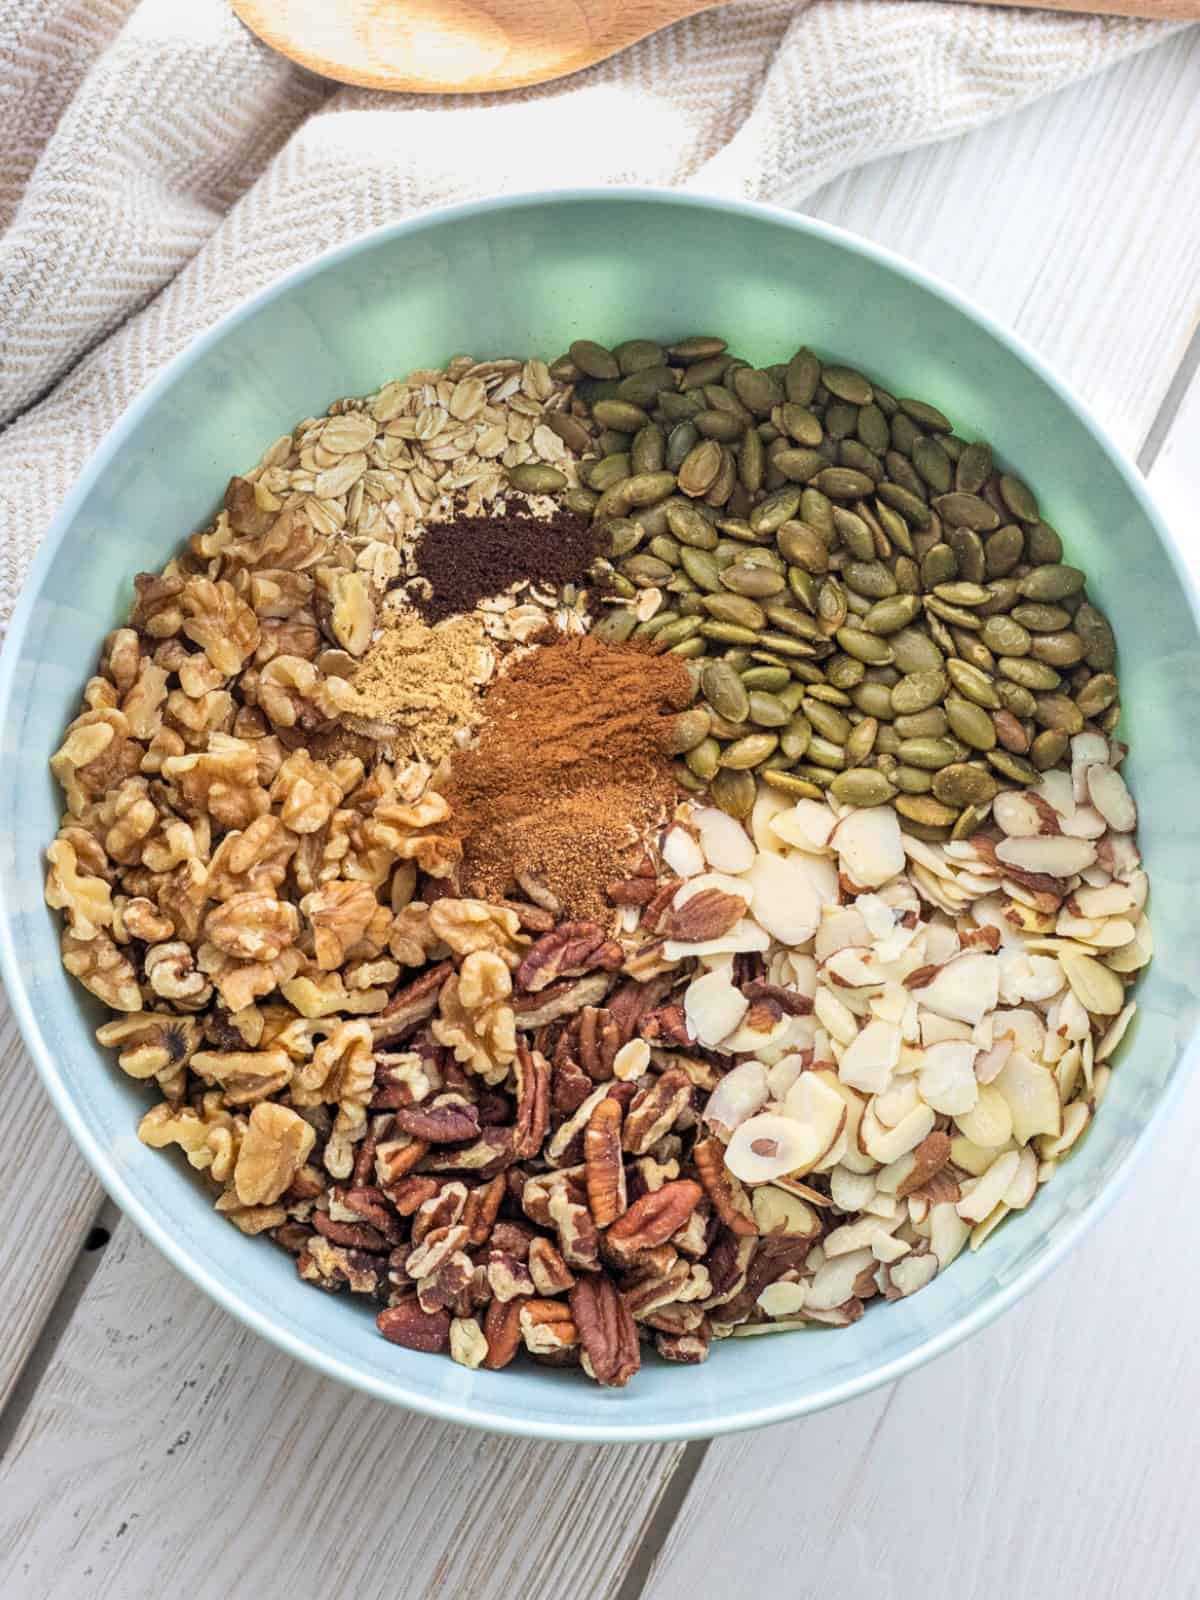 Spices on top of oats, pumpkin seeds, and nuts in a bowl.